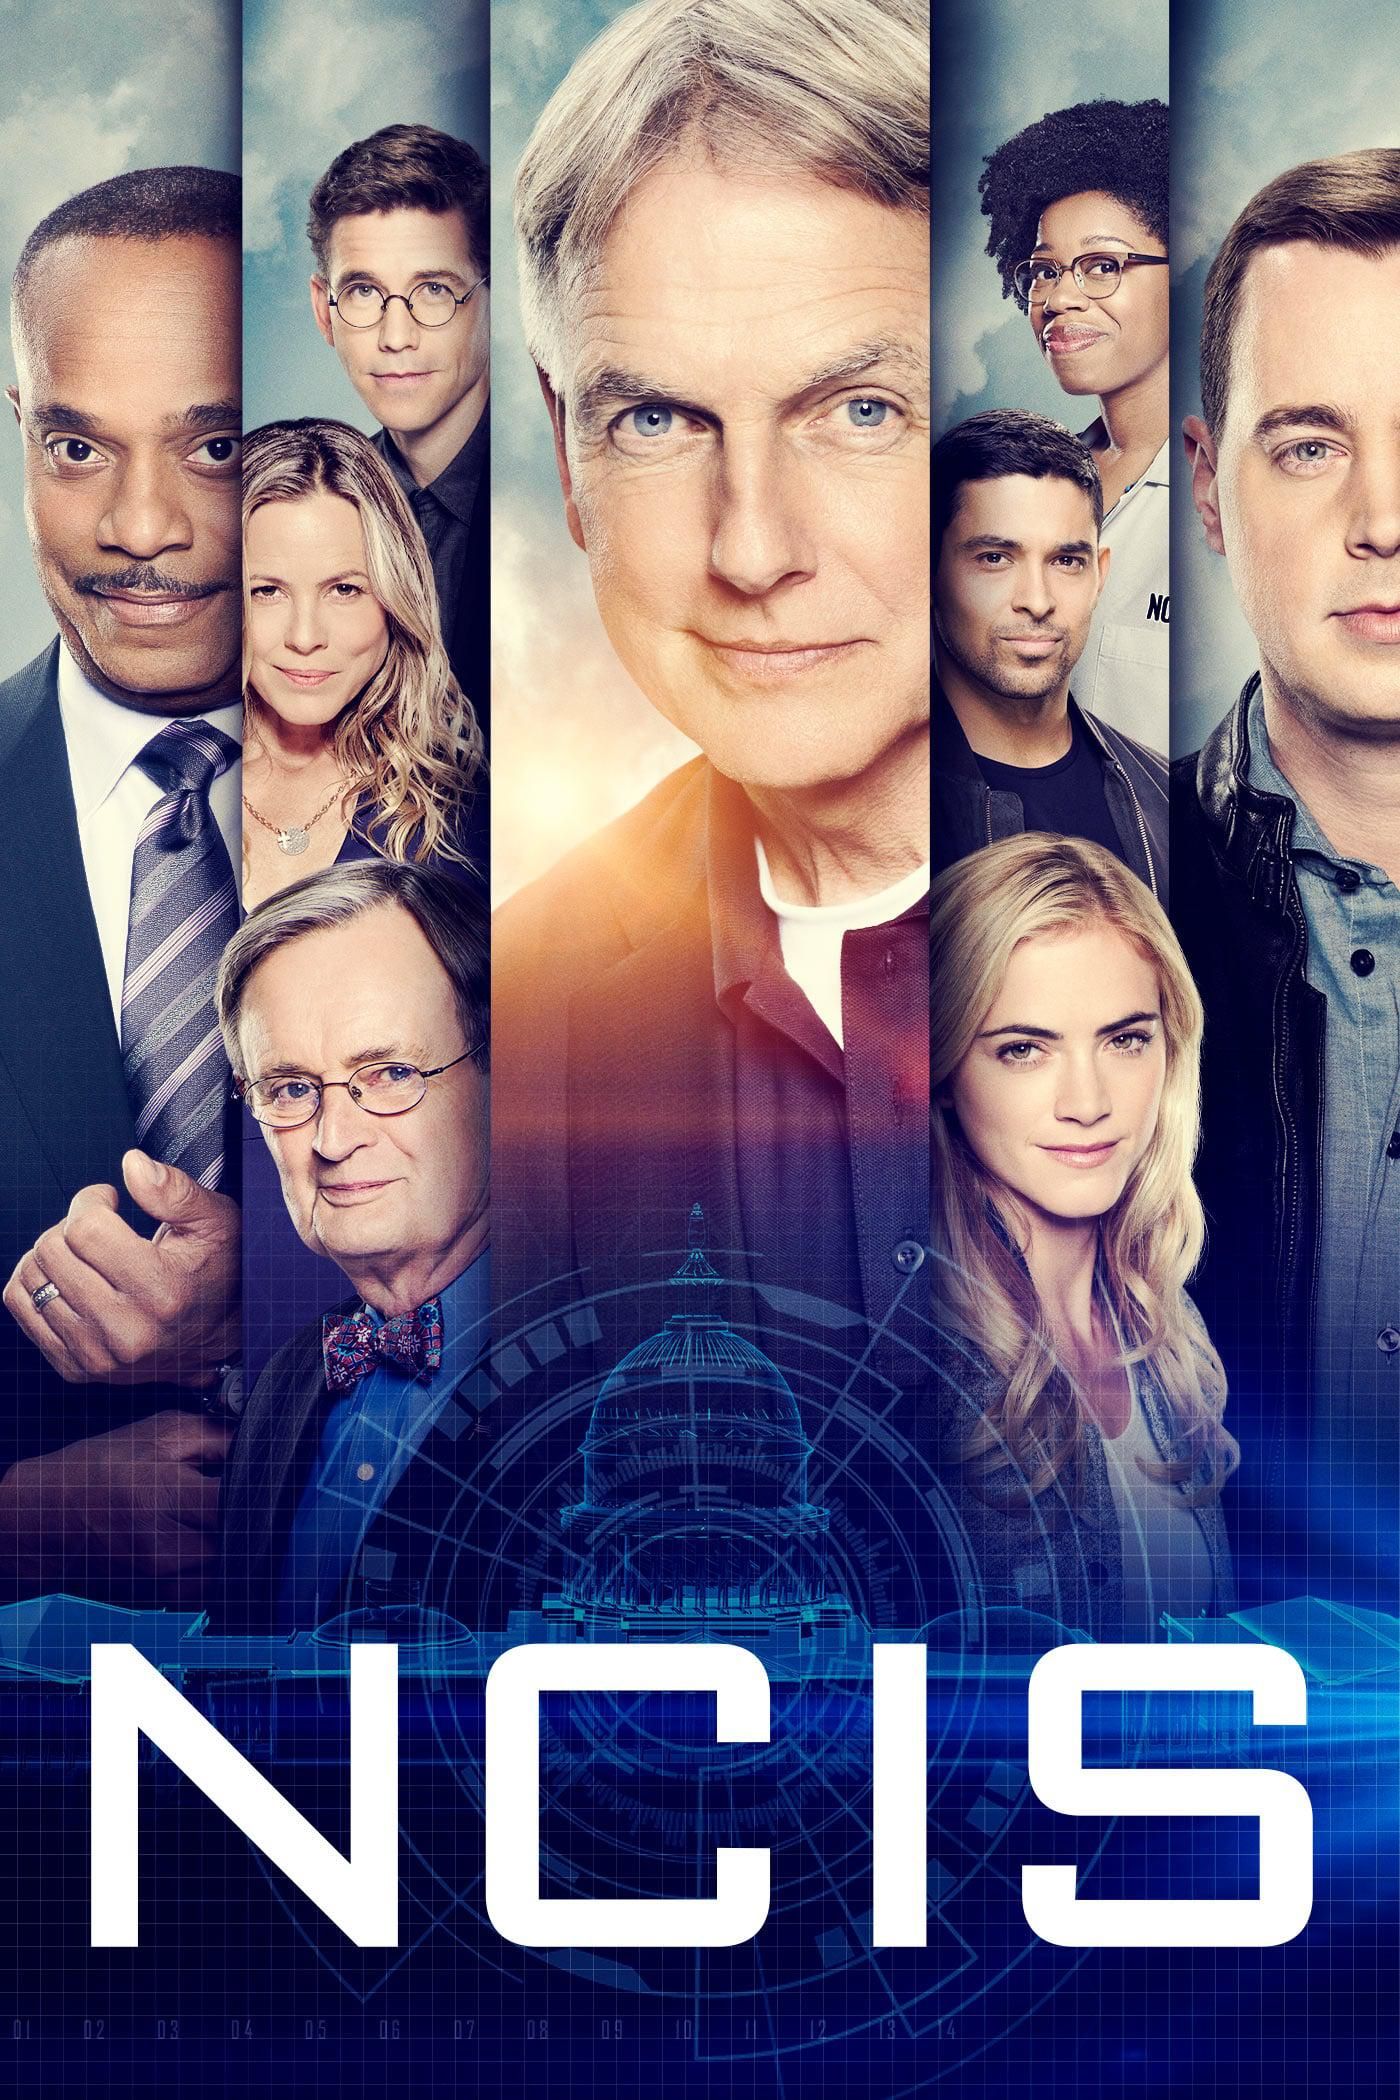 ncis: origins recruits prey and once upon a time stars